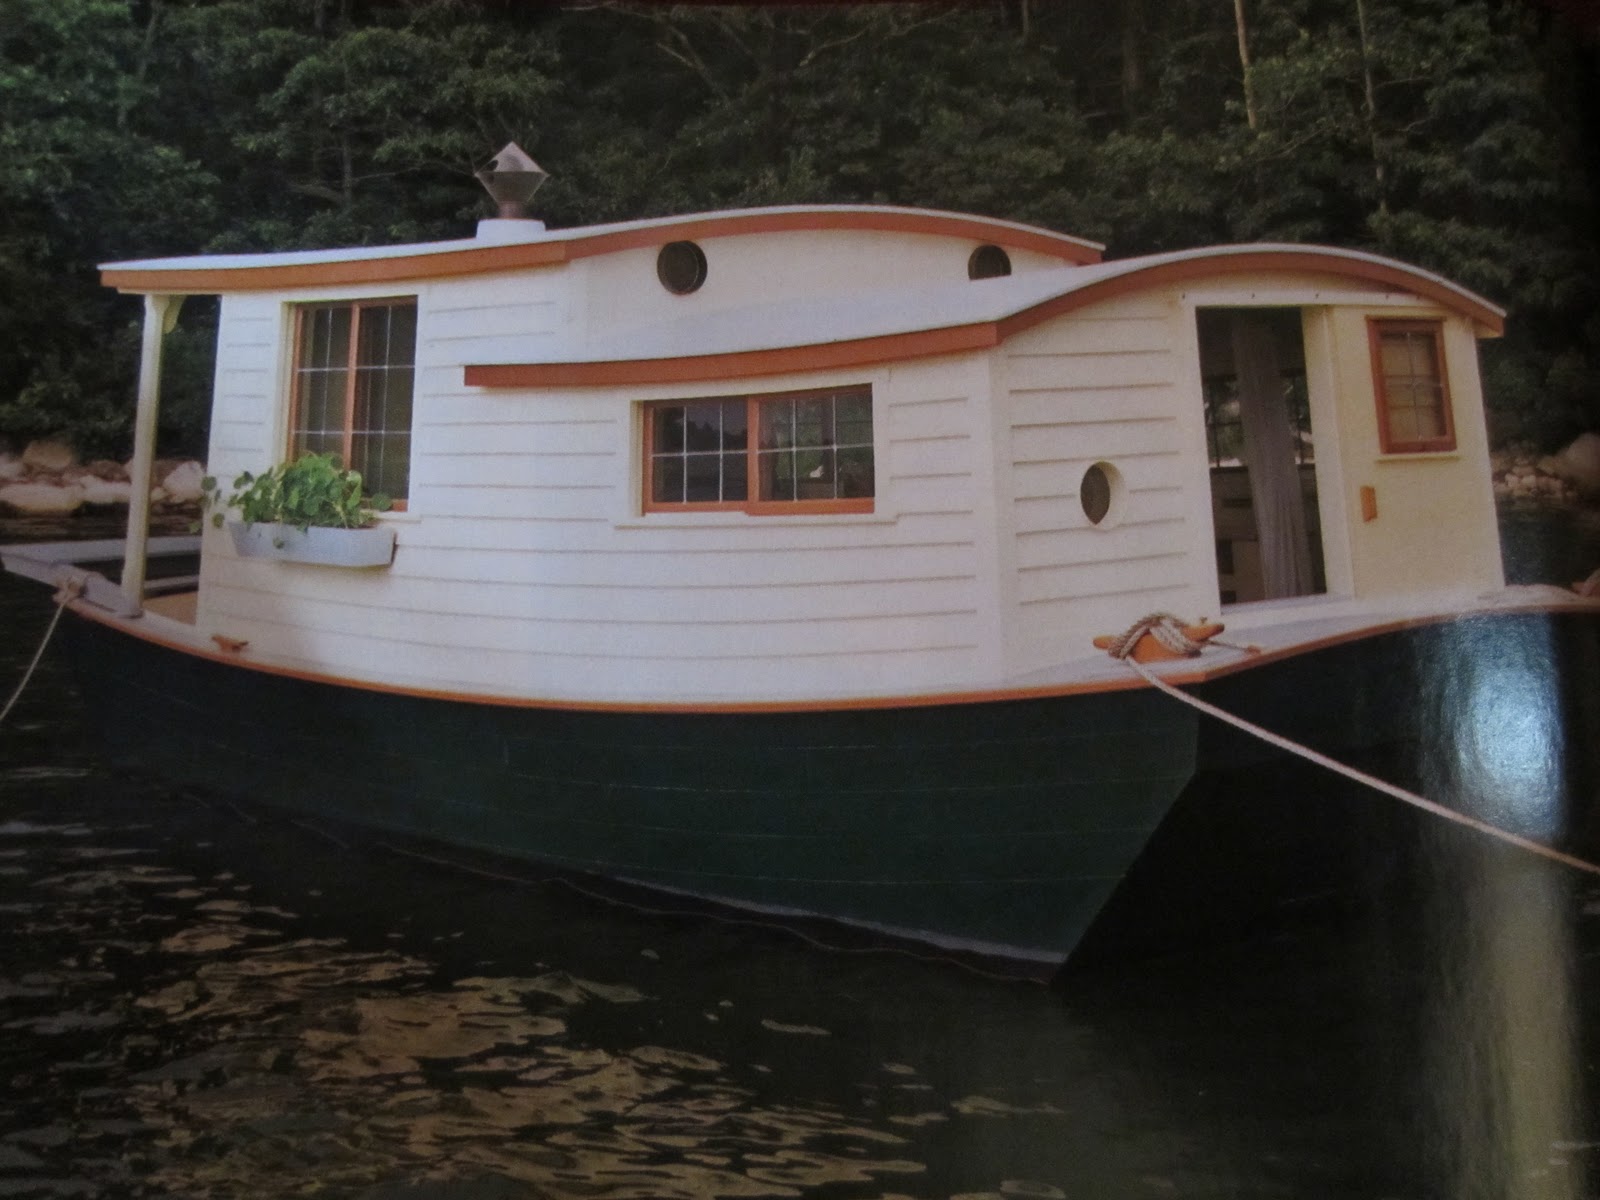  Man wooden houseboat plans Designs Micro Houseboat You Can Build for